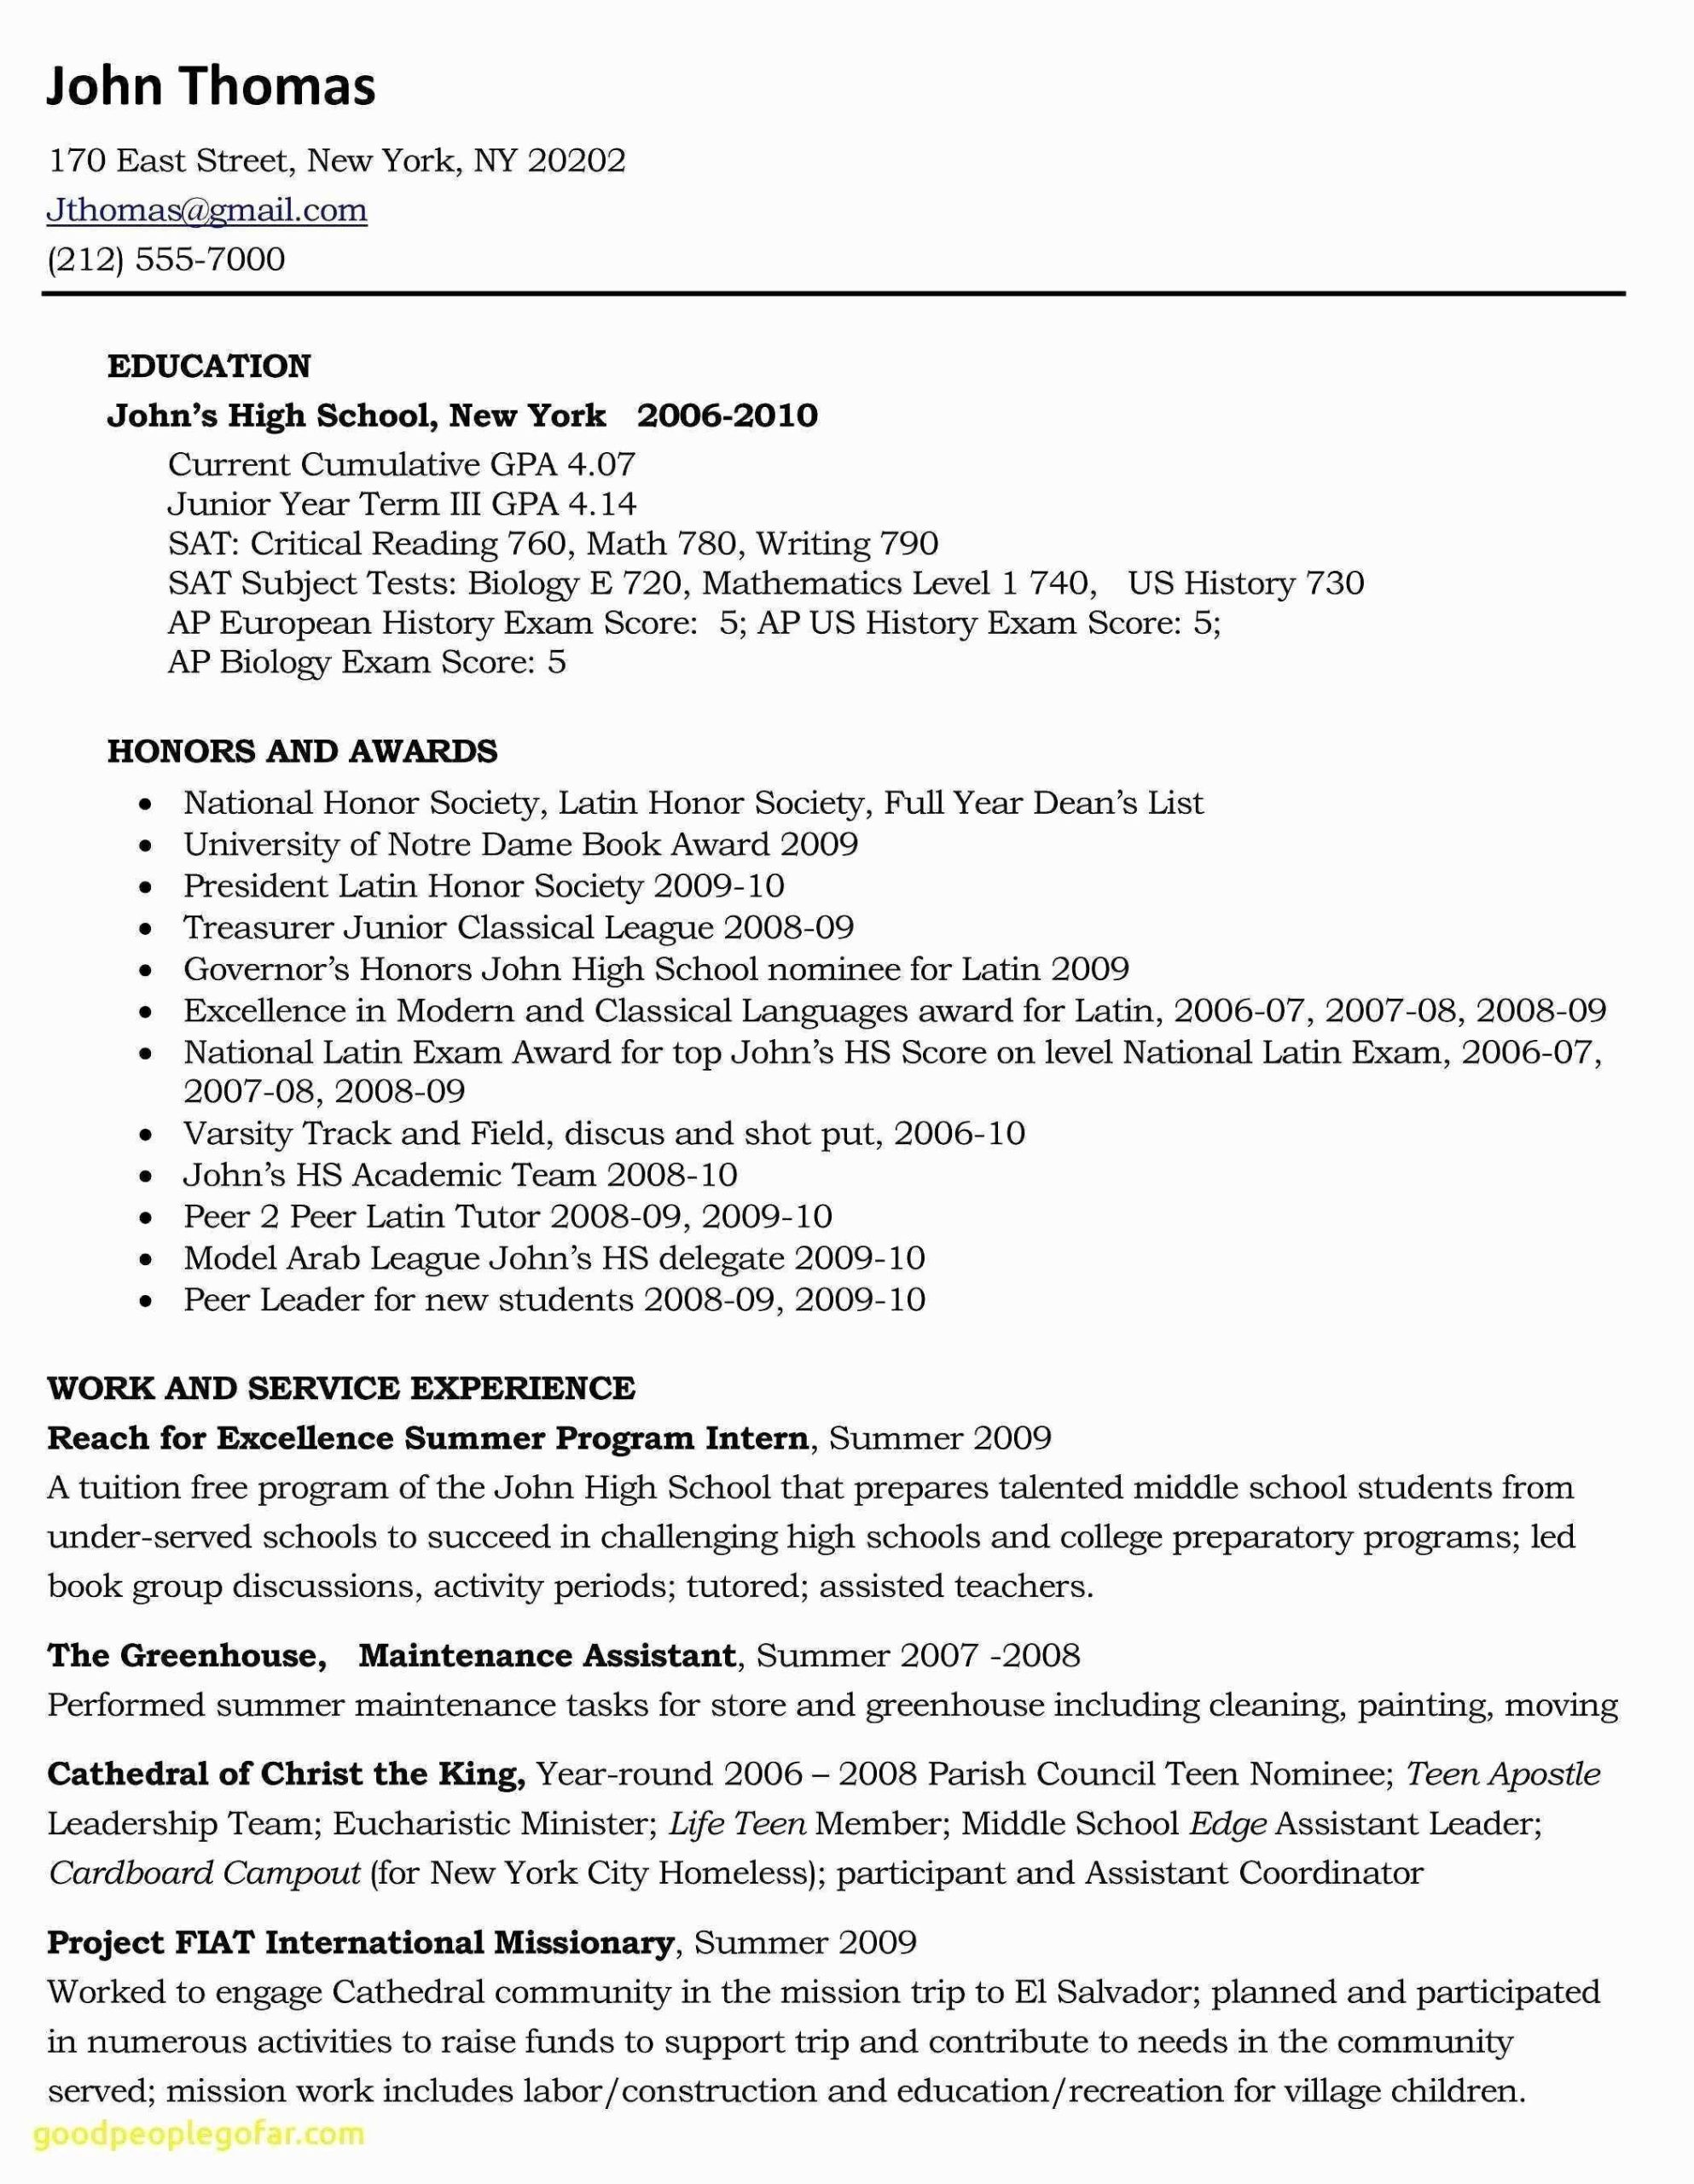 Sample Resume Objective Statements for High School Students Business Administration Level 3 Mock Test – Bunsis